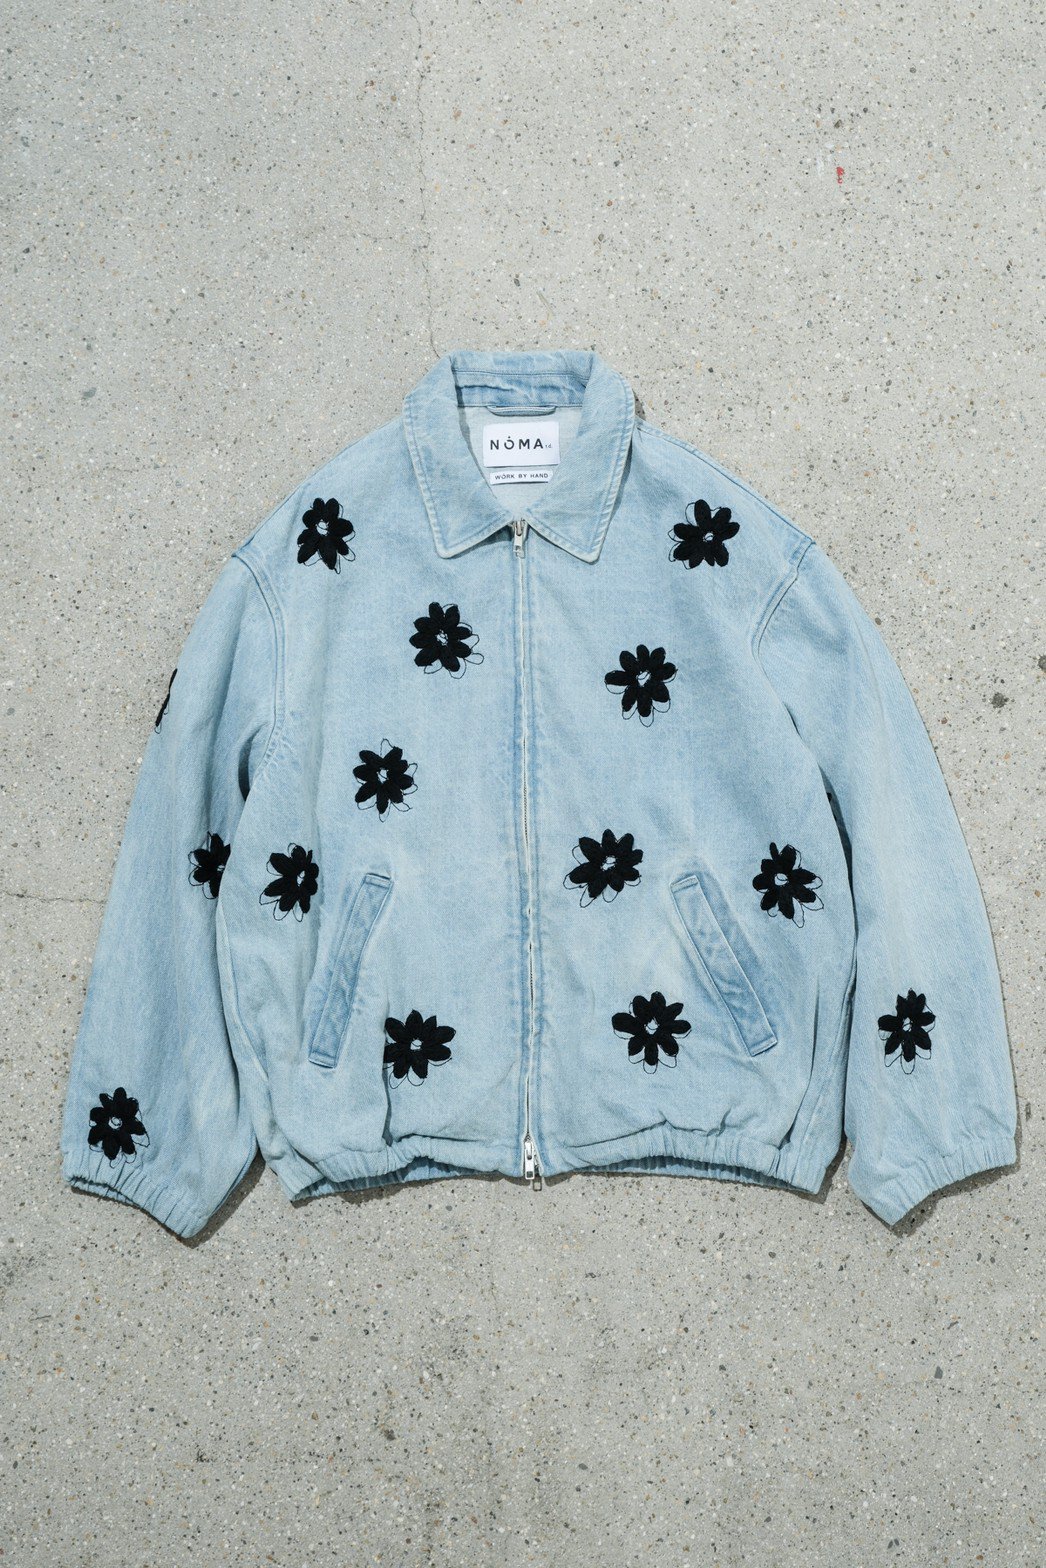 NOMA t.d. / Flower Hand Embroidery Blouson